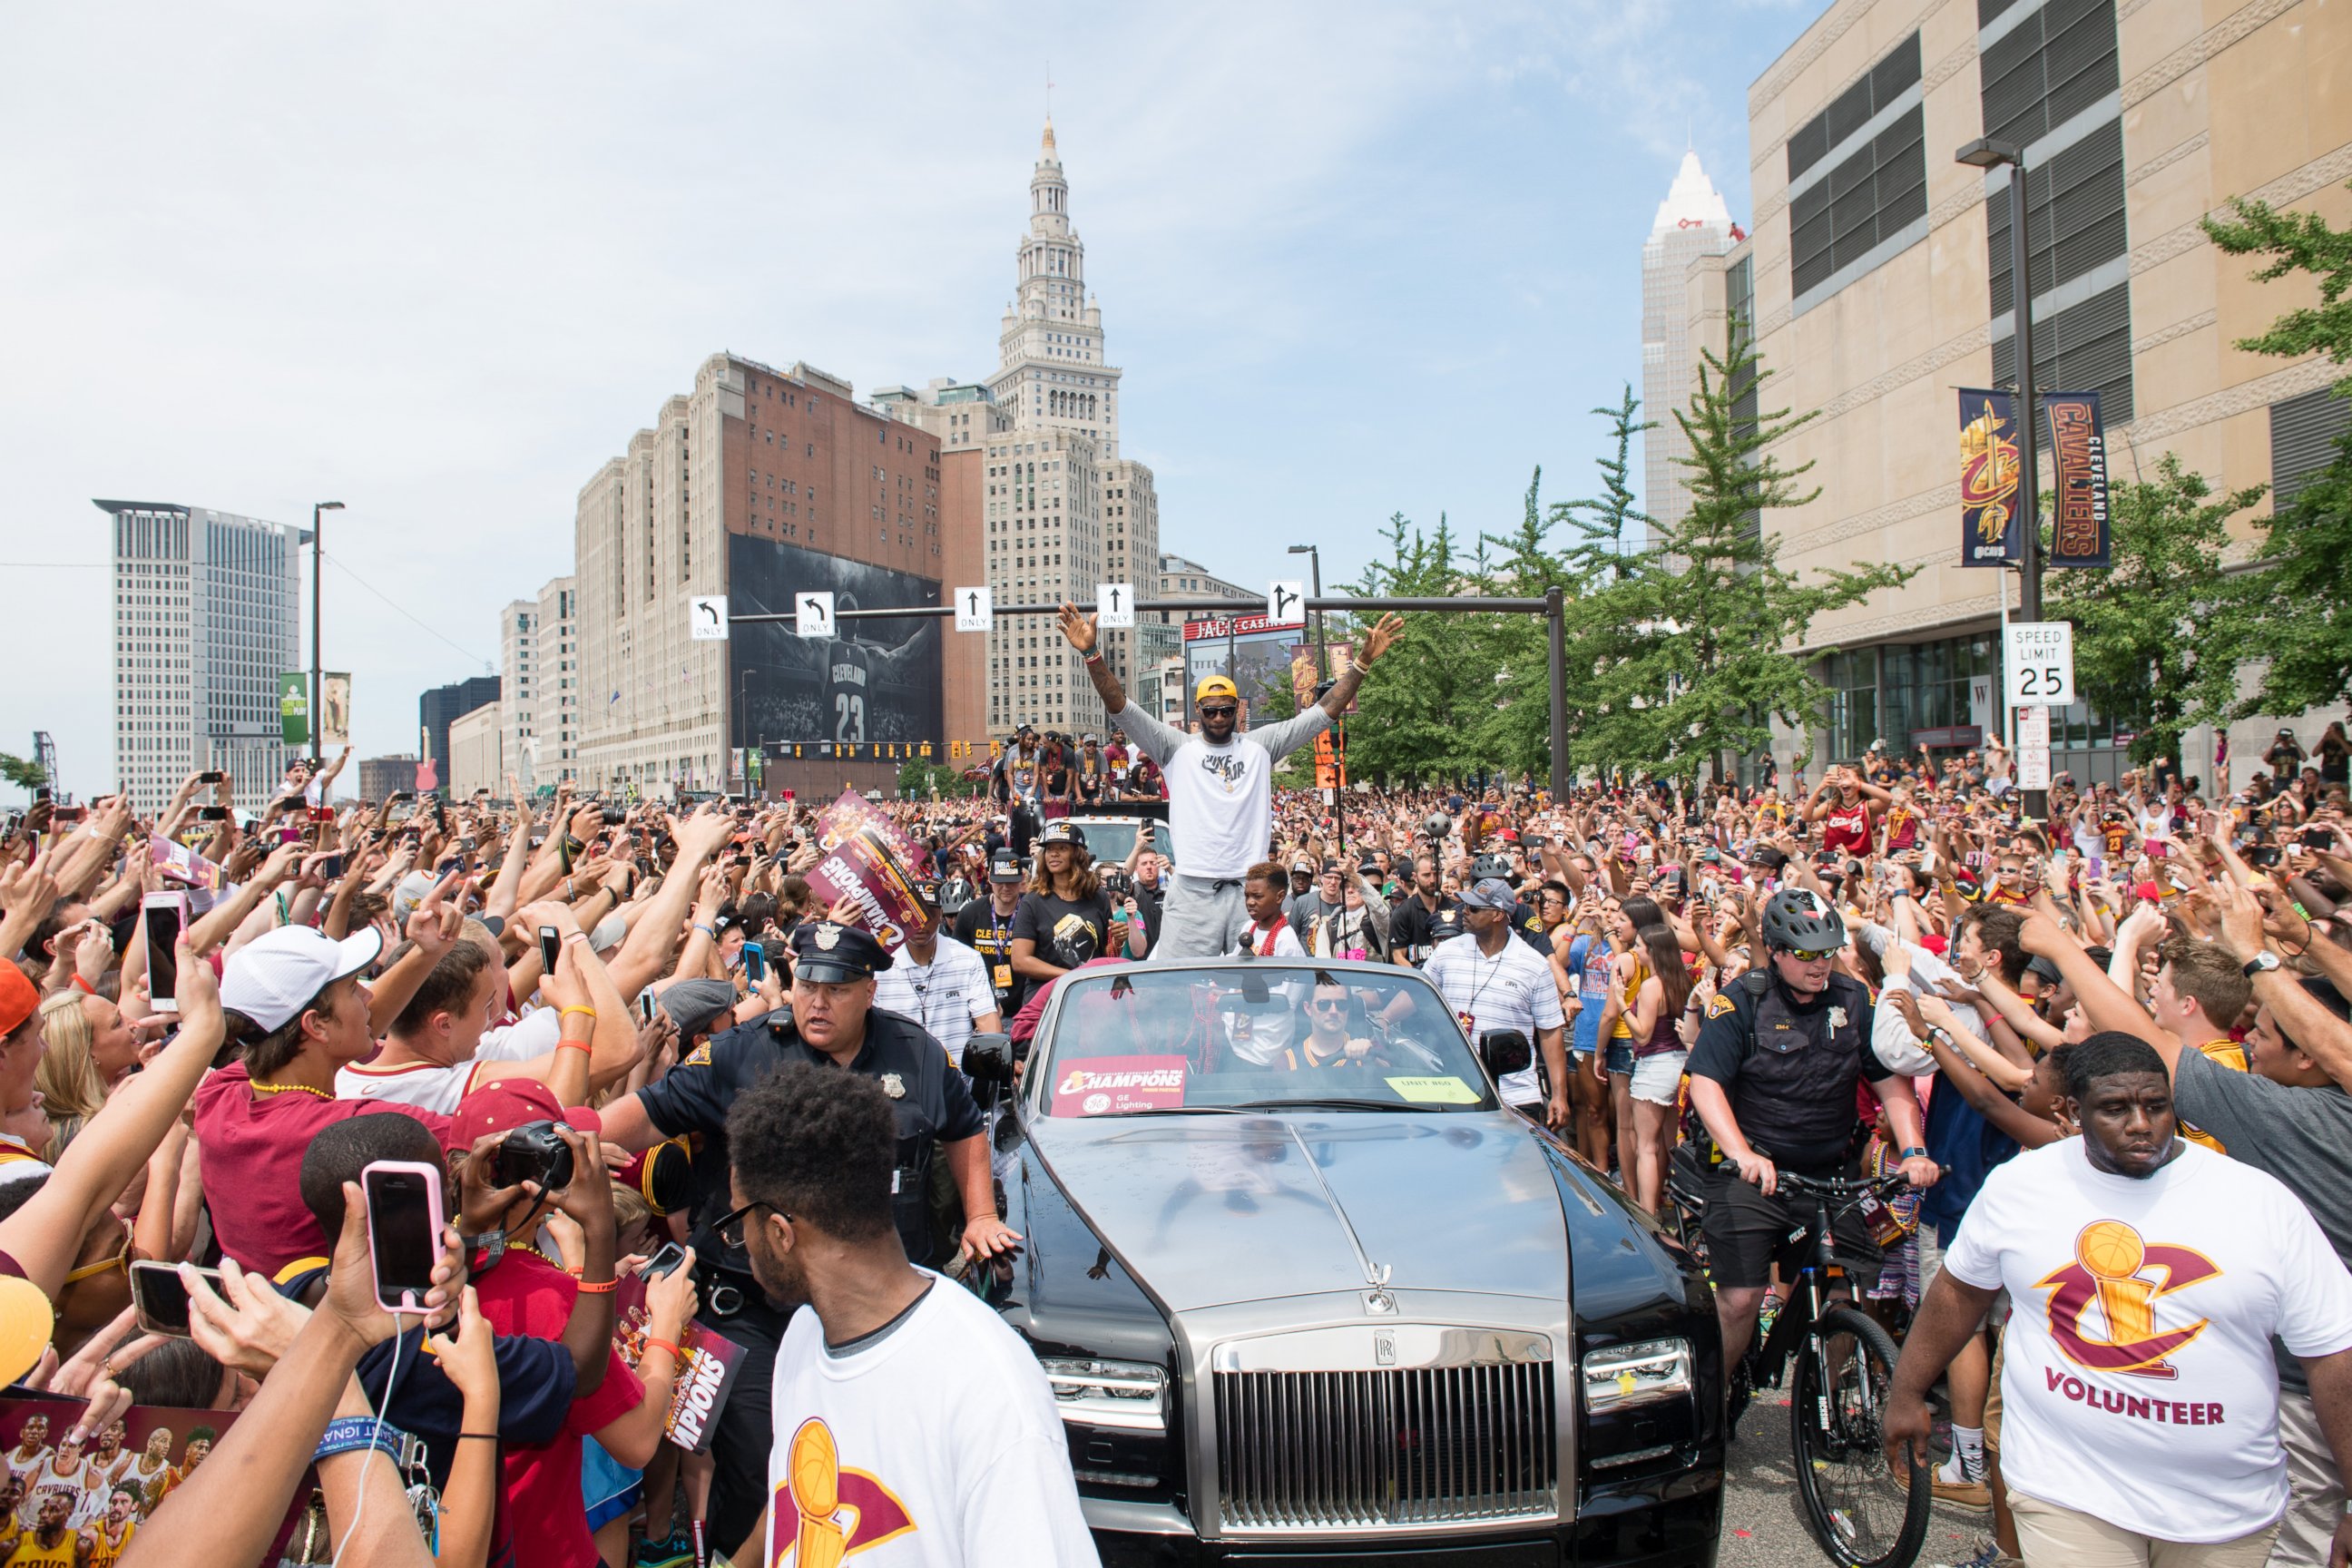 PHOTO: LeBron James of the Cleveland Cavaliers celebrates during the Cleveland Cavaliers 2016 championship victory parade and rally on June 22, 2016 in Cleveland, Ohio.